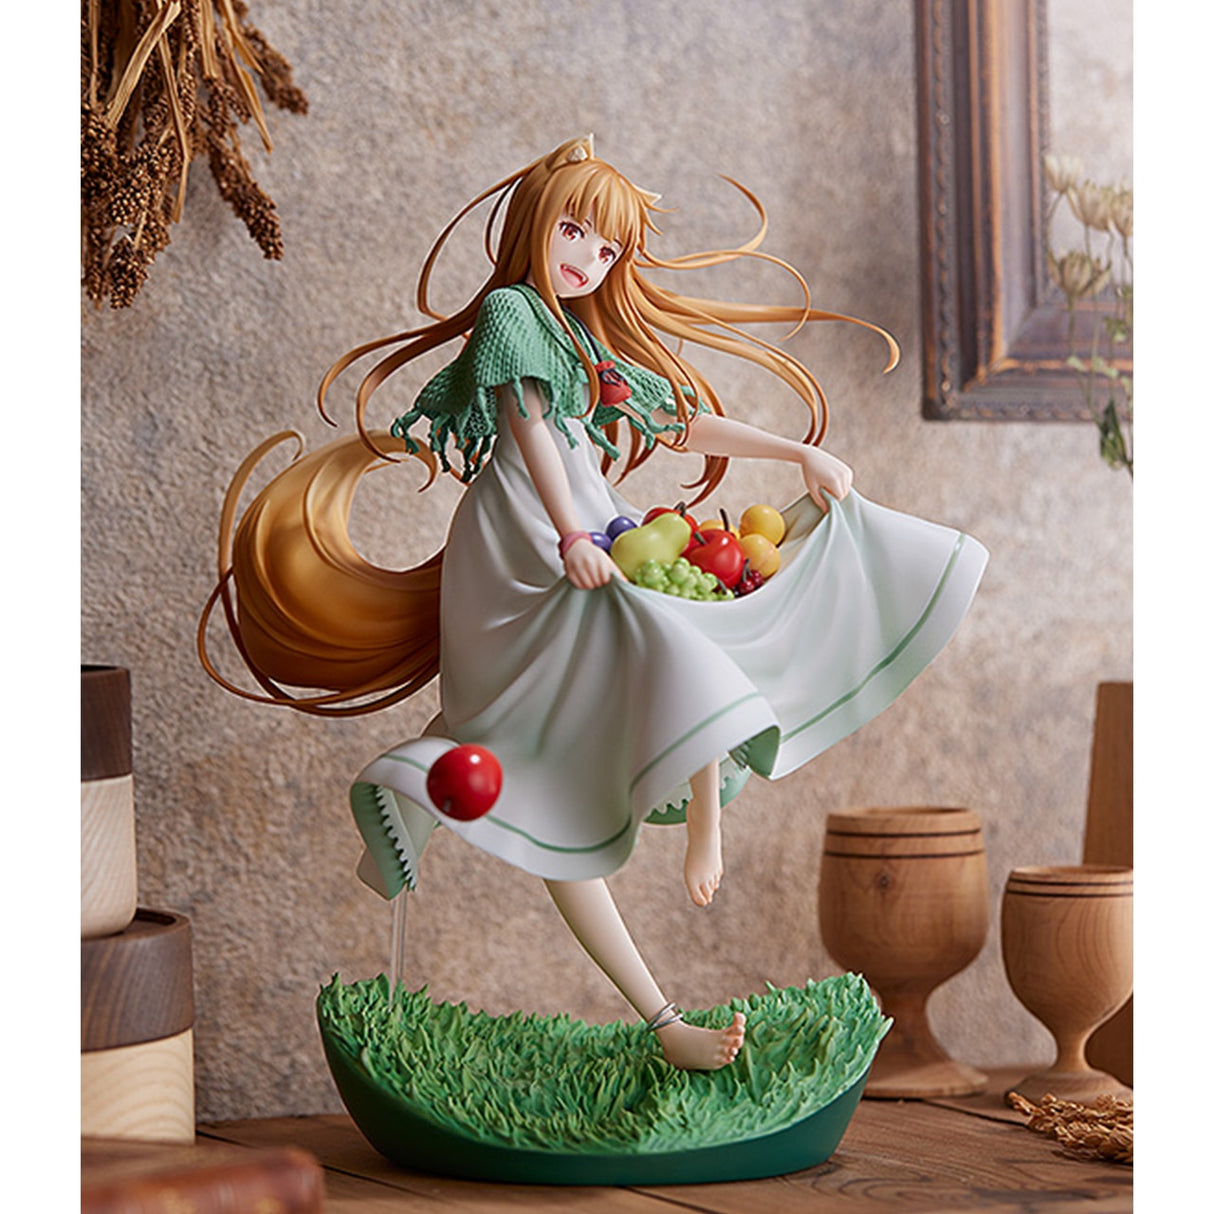 Graceful Harvest: Holo in Verdant Dress with Fruit